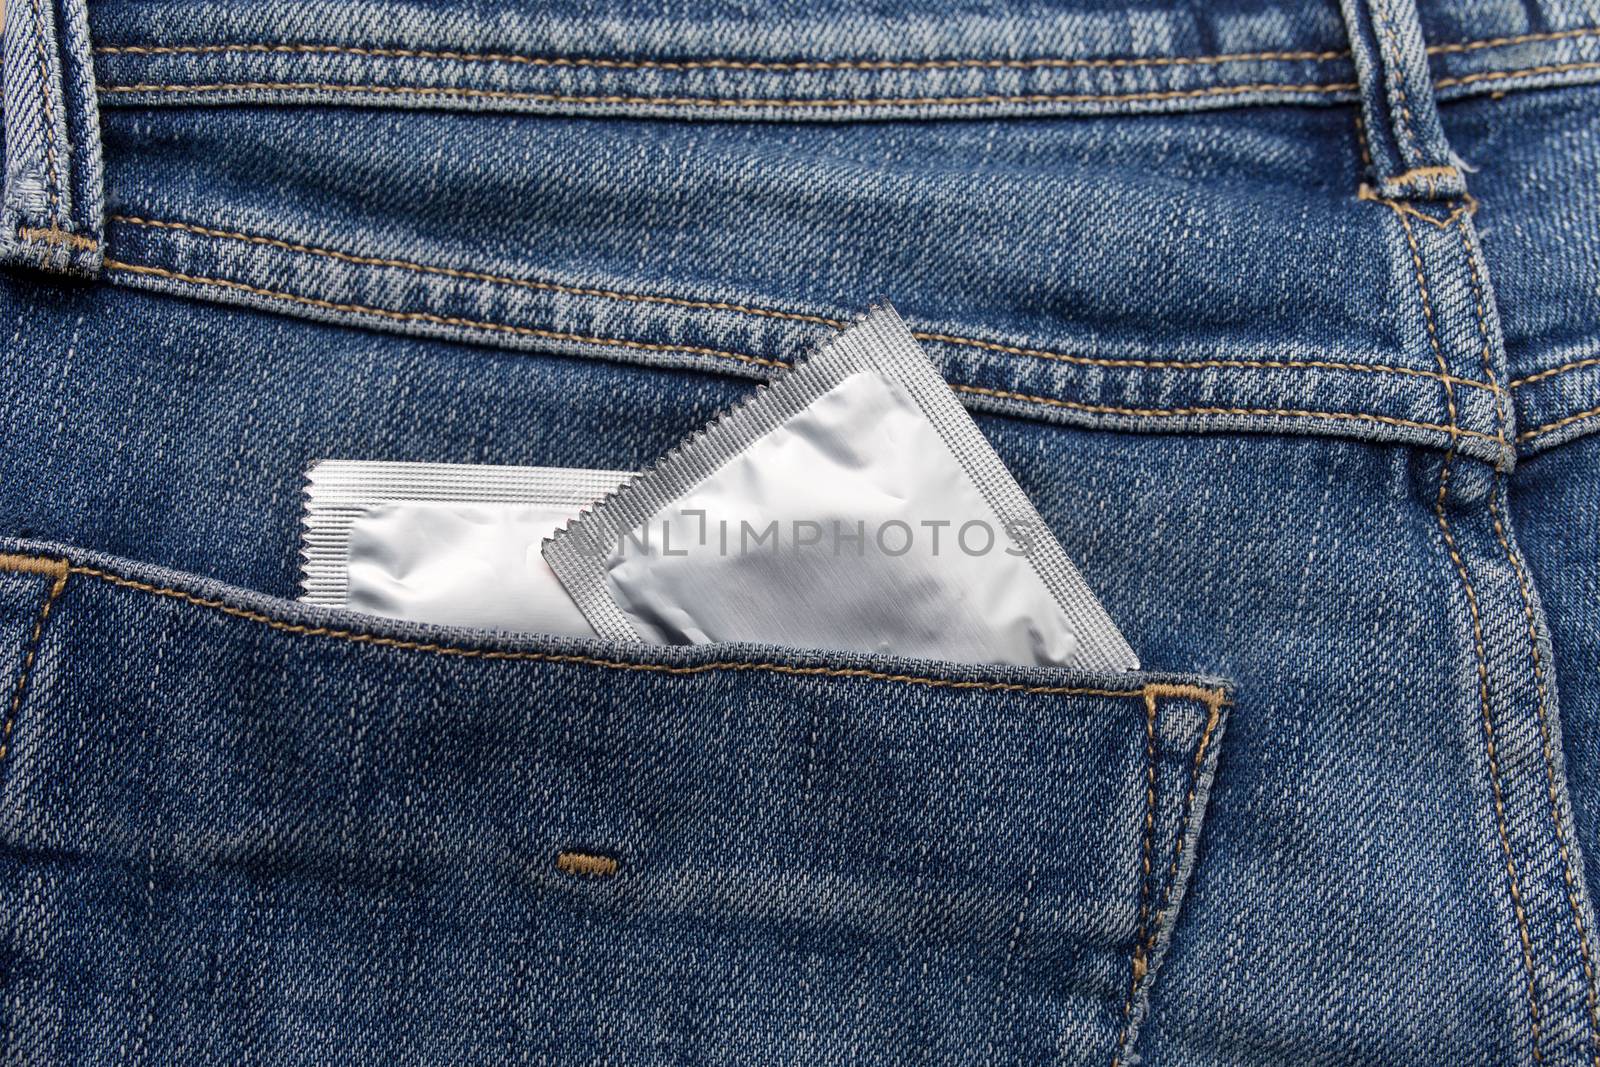 Condom silver color in the pocket of a blue jeans close up